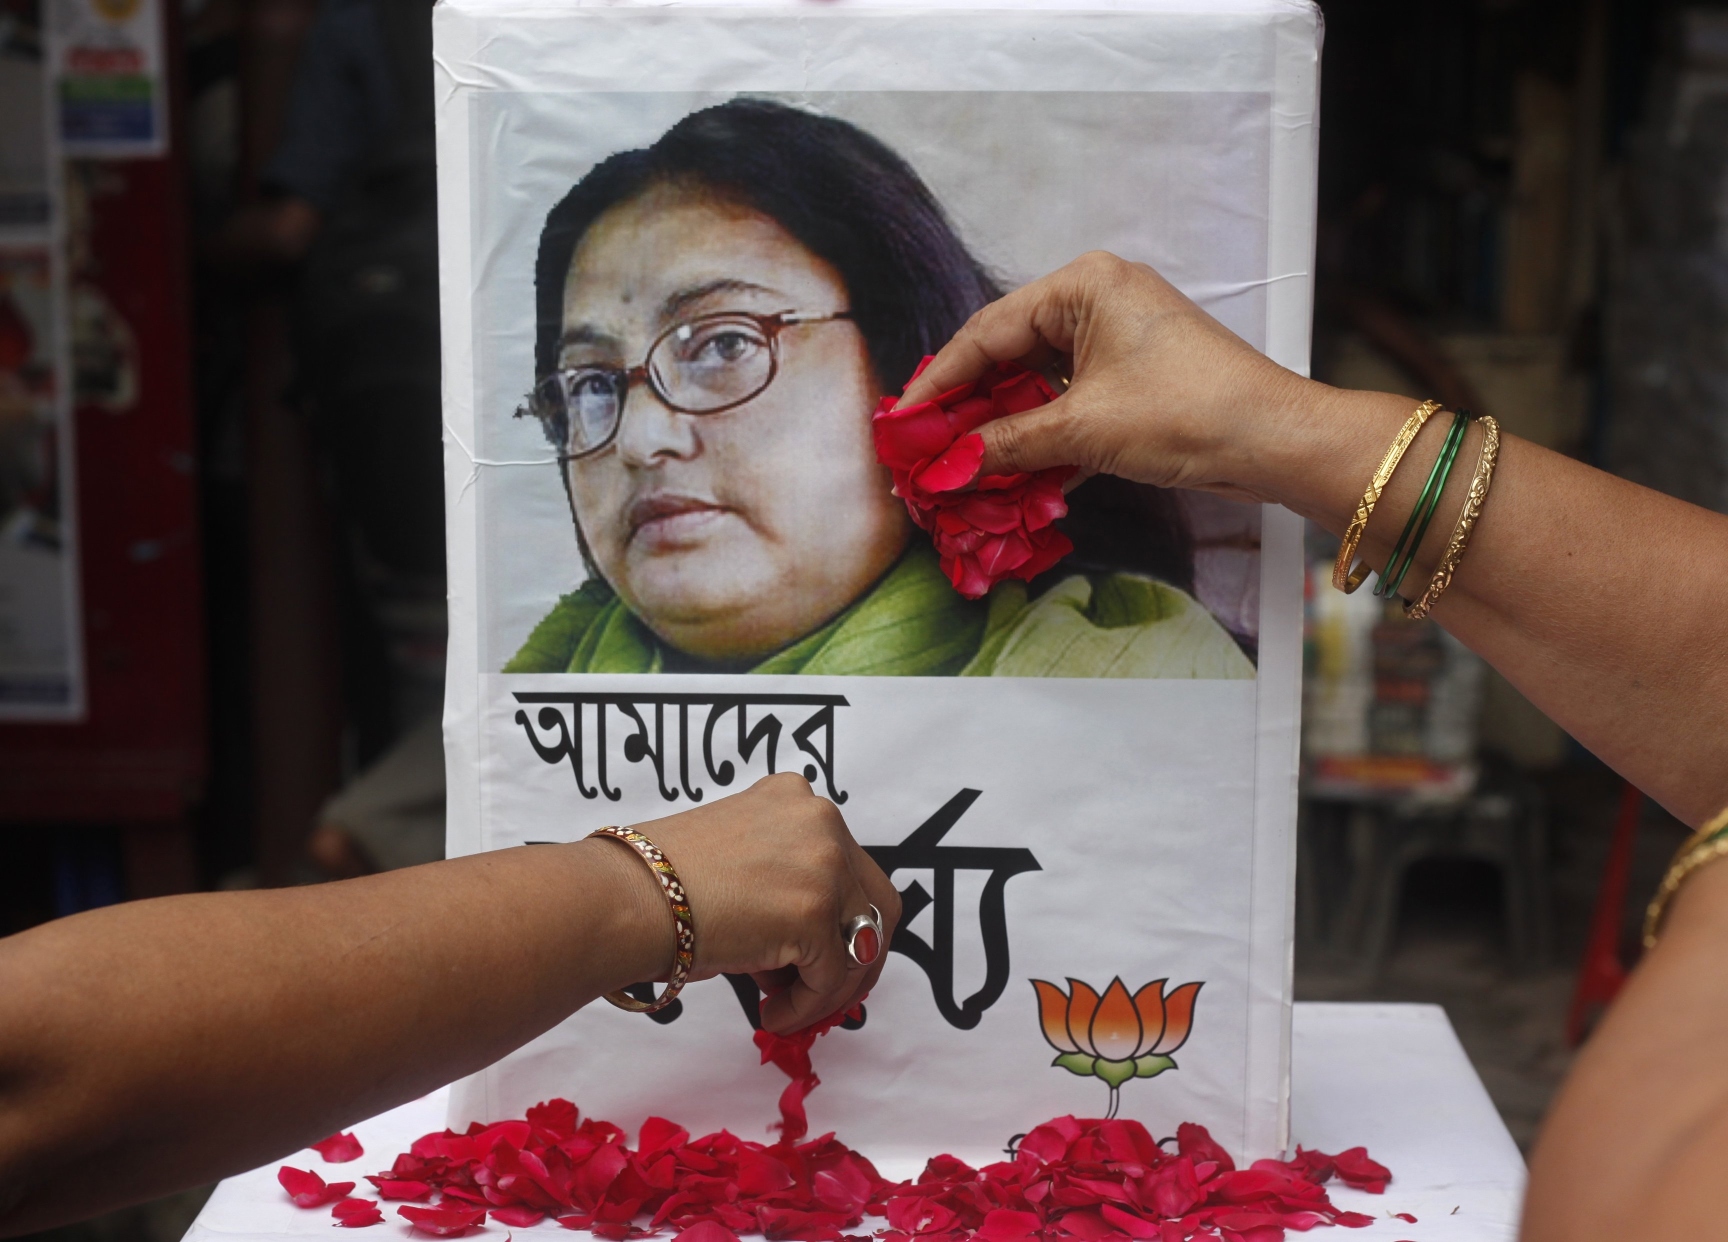 Supporters of India's main opposition Hindu nationalist Bharatiya Janata Party (BJP) women's wing, scatter rose petals in front of a portrait of an Indian author Sushmita Banerjee, in Kolkata. Photo: Reuters